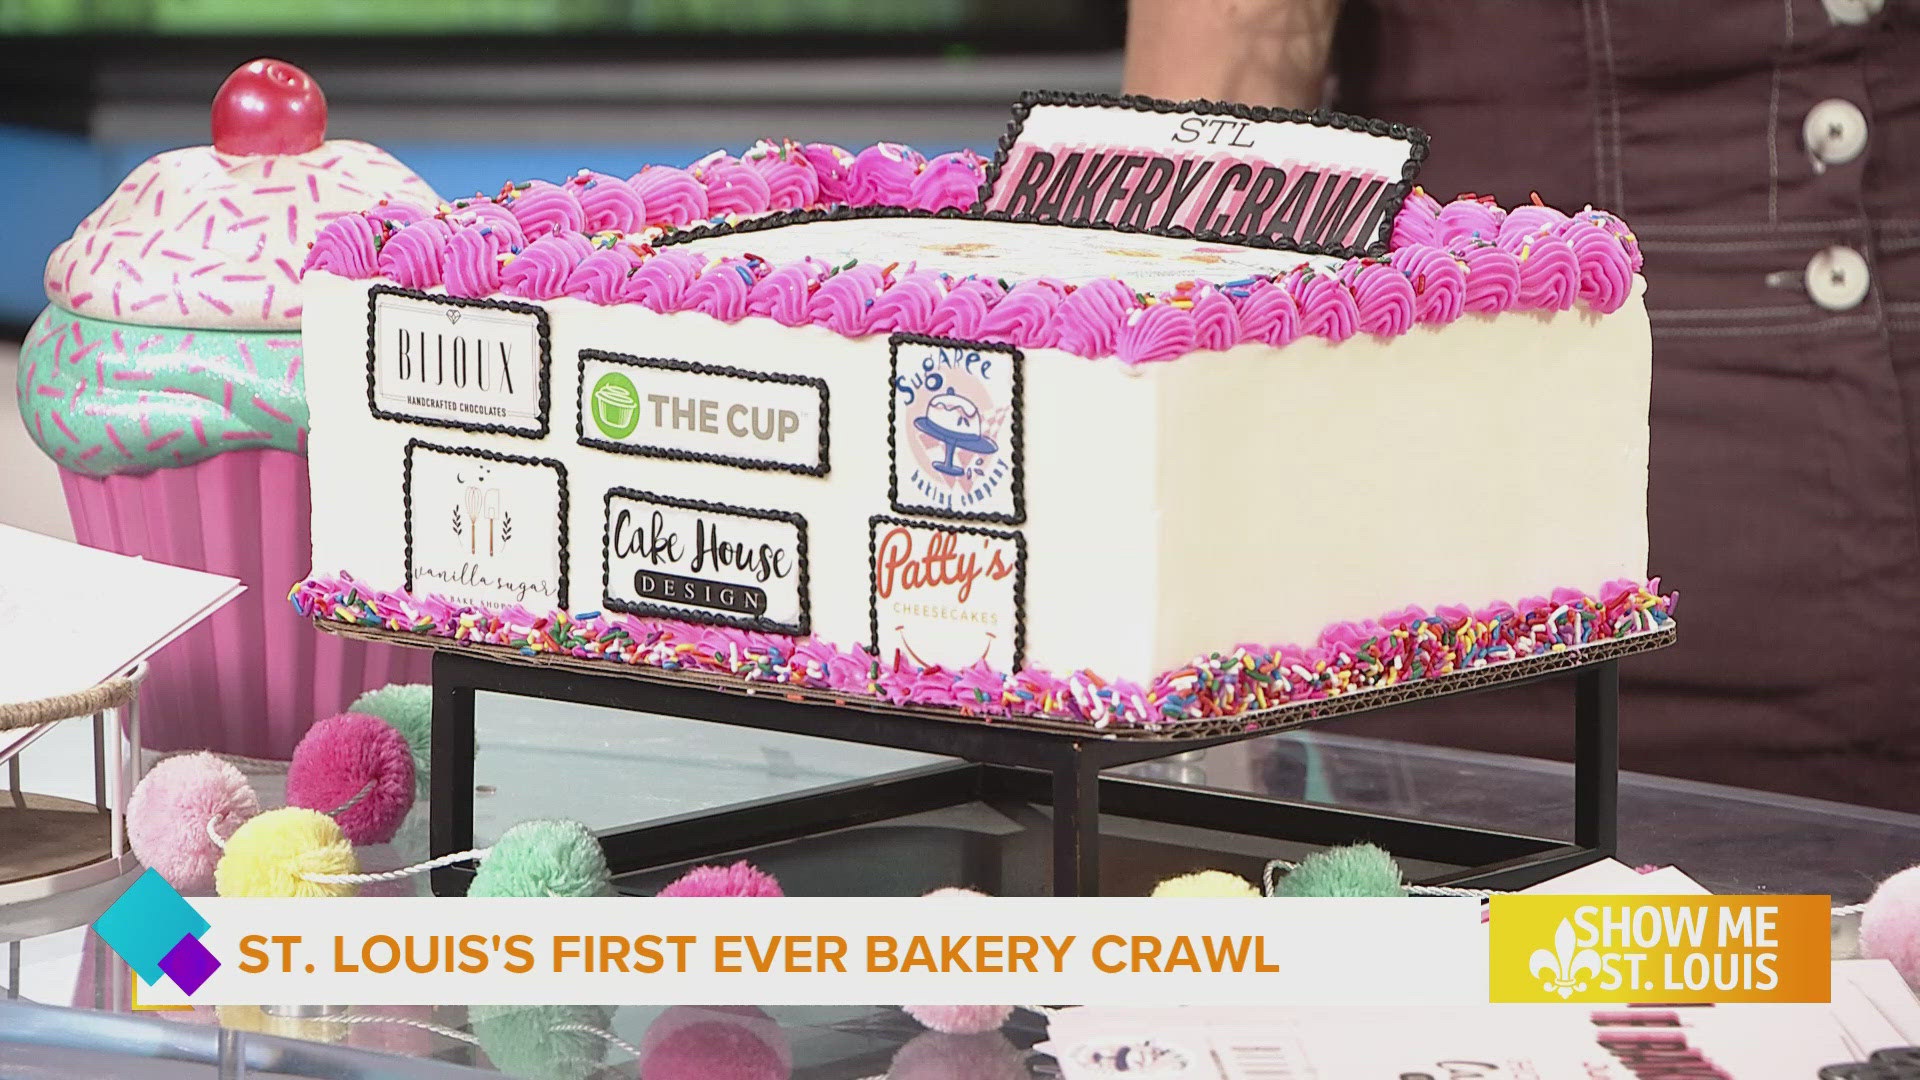 Indulge in sweets as you travel to 6 participating bakeries for this year's St. Louis Bakery Crawl.